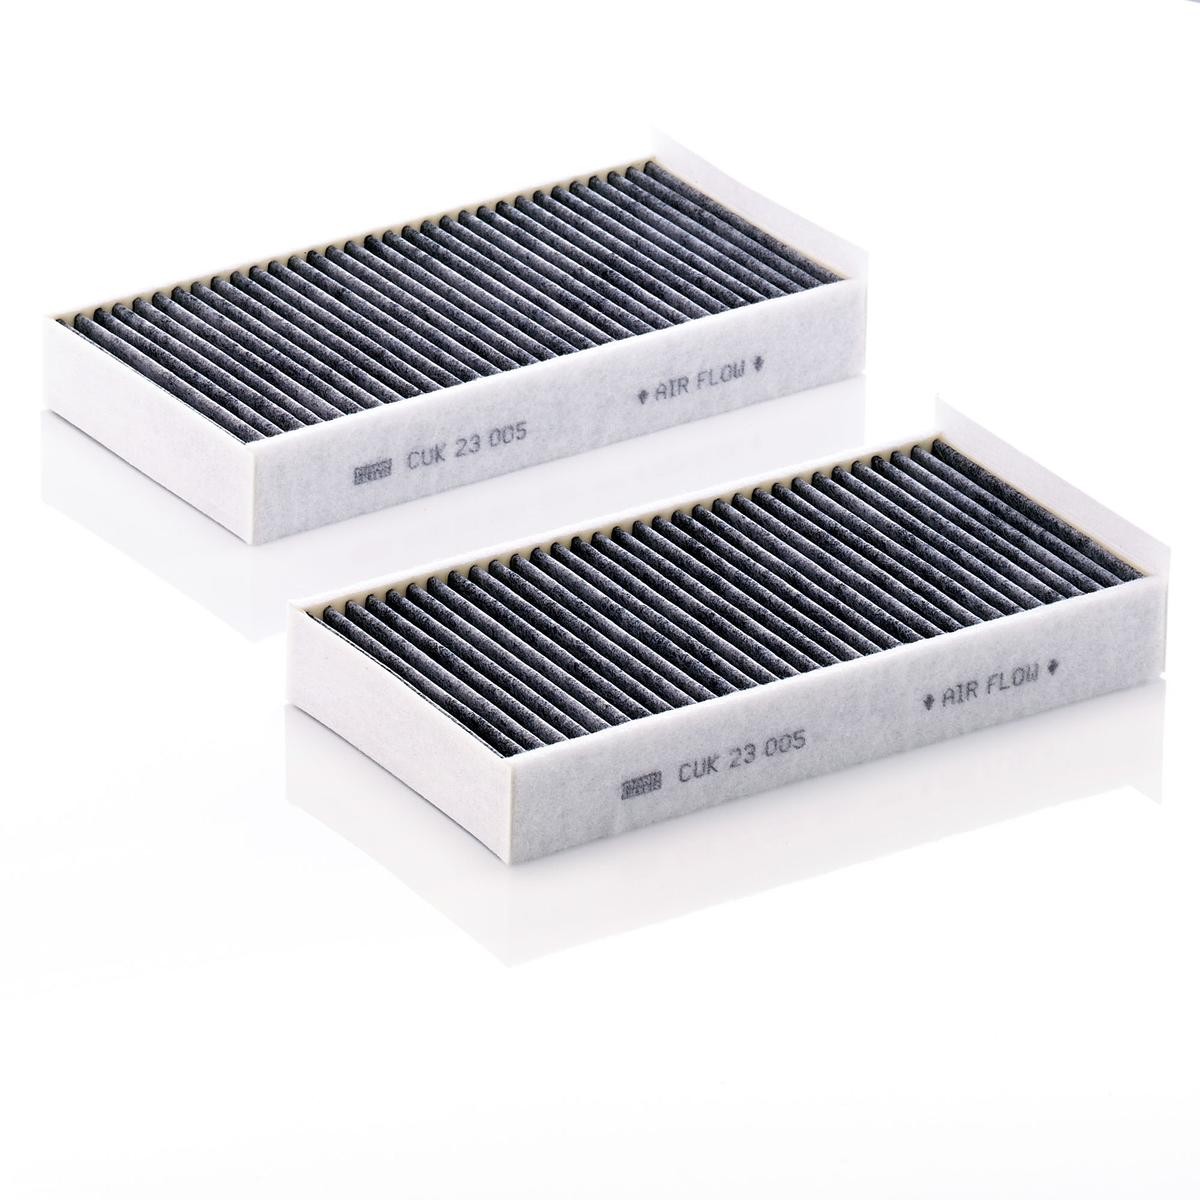 MANN-FILTER Activated Carbon Filter, 232 mm x 116 mm x 32 mm Width: 116mm, Height: 32mm, Length: 232mm Cabin filter CUK 23 005-2 buy